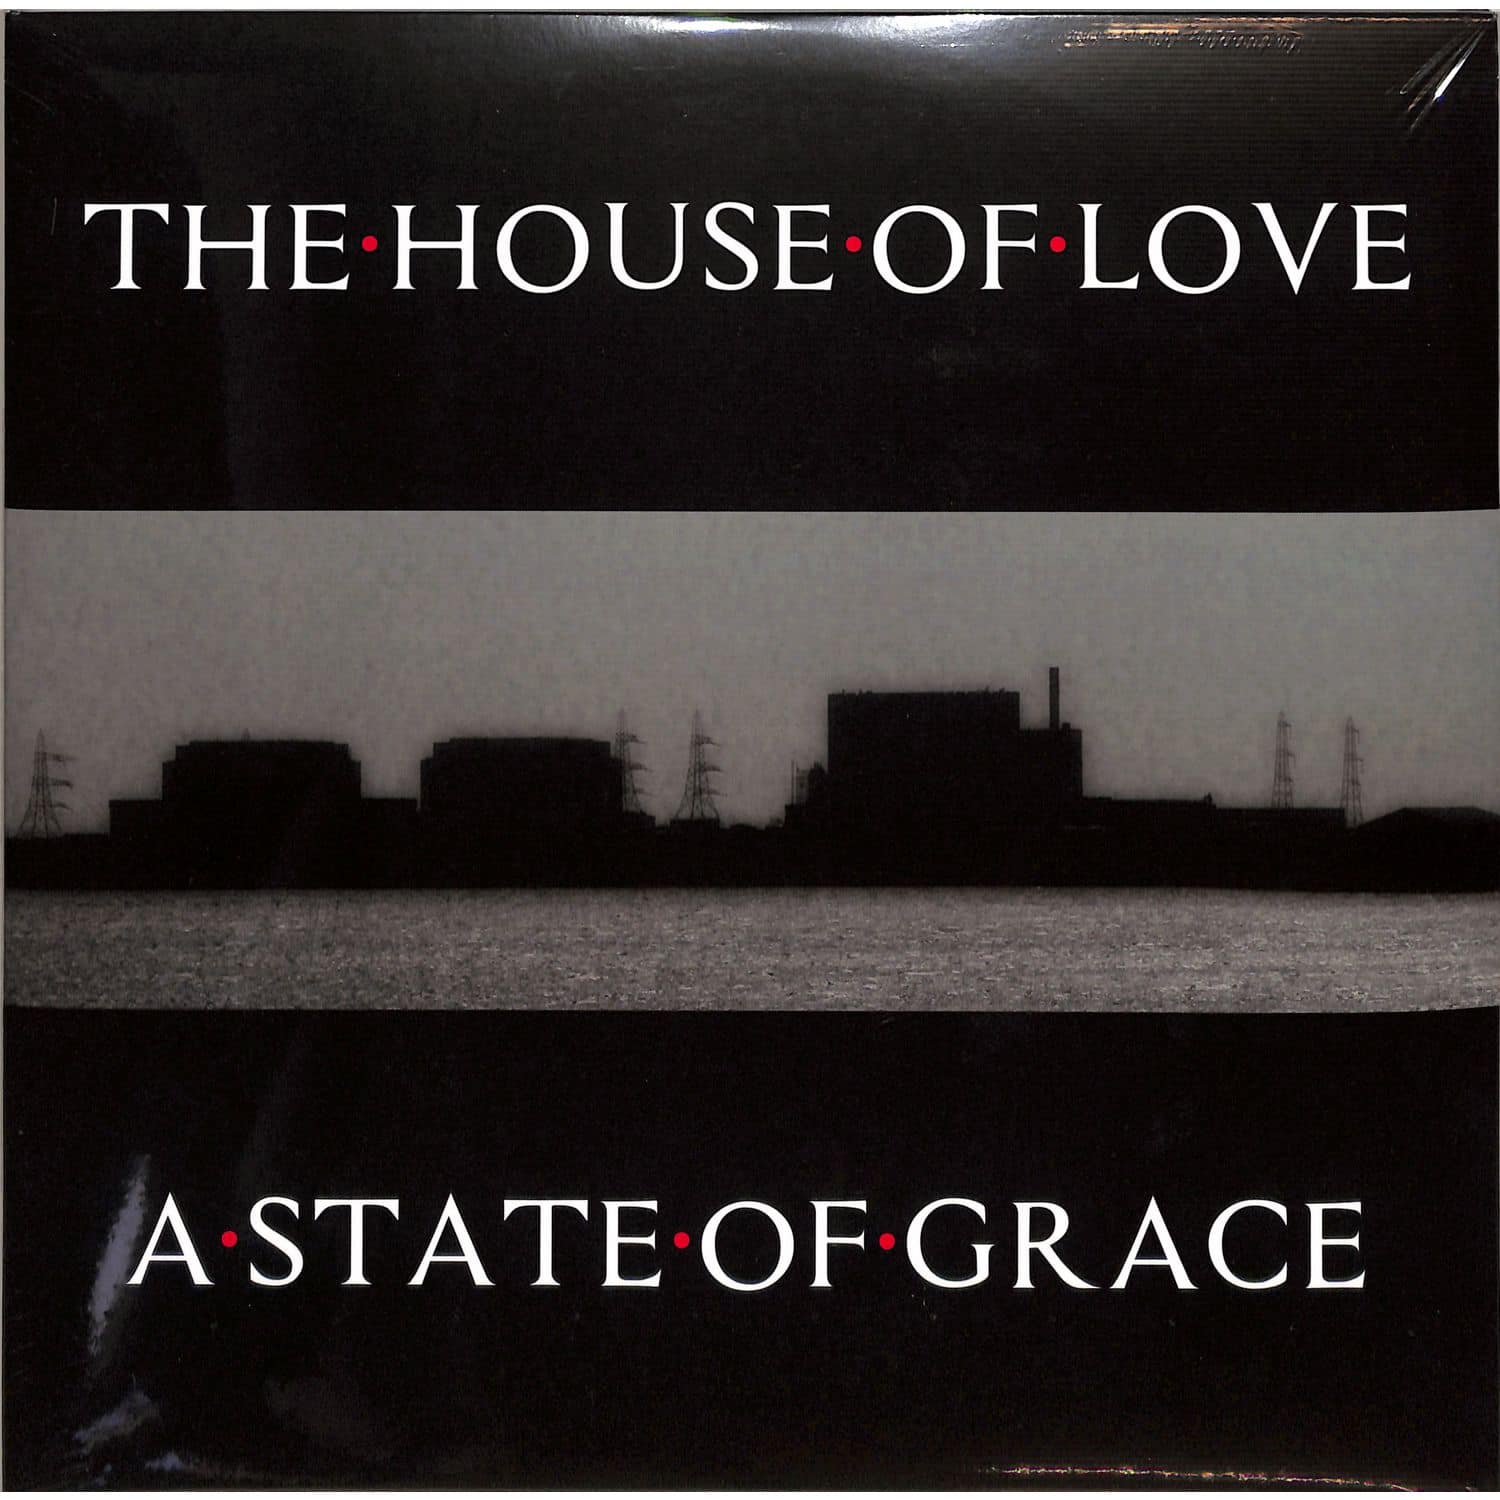 The House Of Love - A STATE OF GRACE 